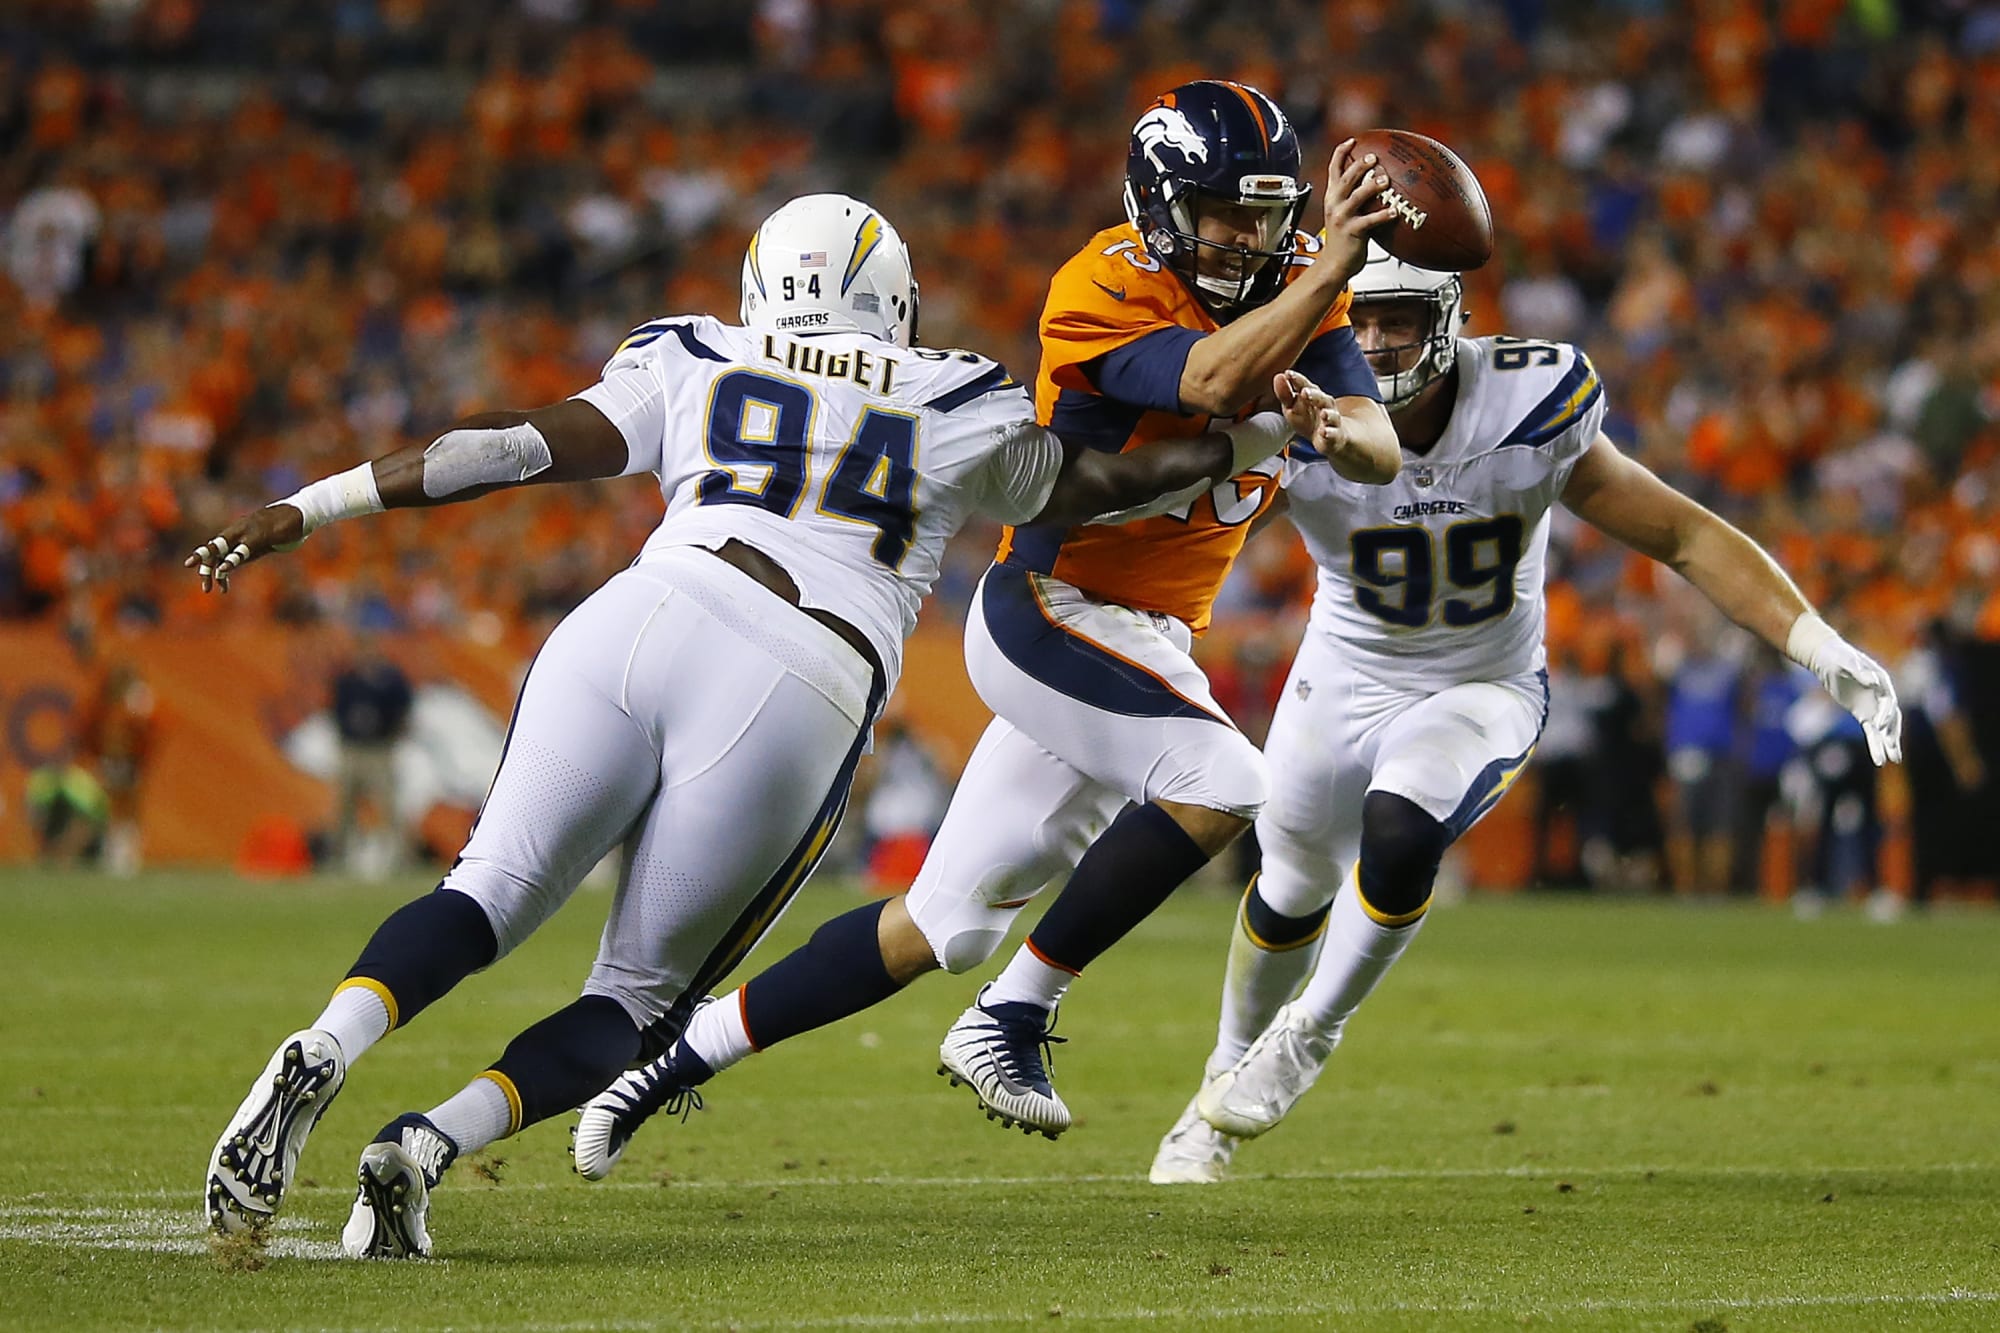 Chargers vs. Broncos Recap: Hopkins seals wild win for Bolts on MNF - Bolts  From The Blue